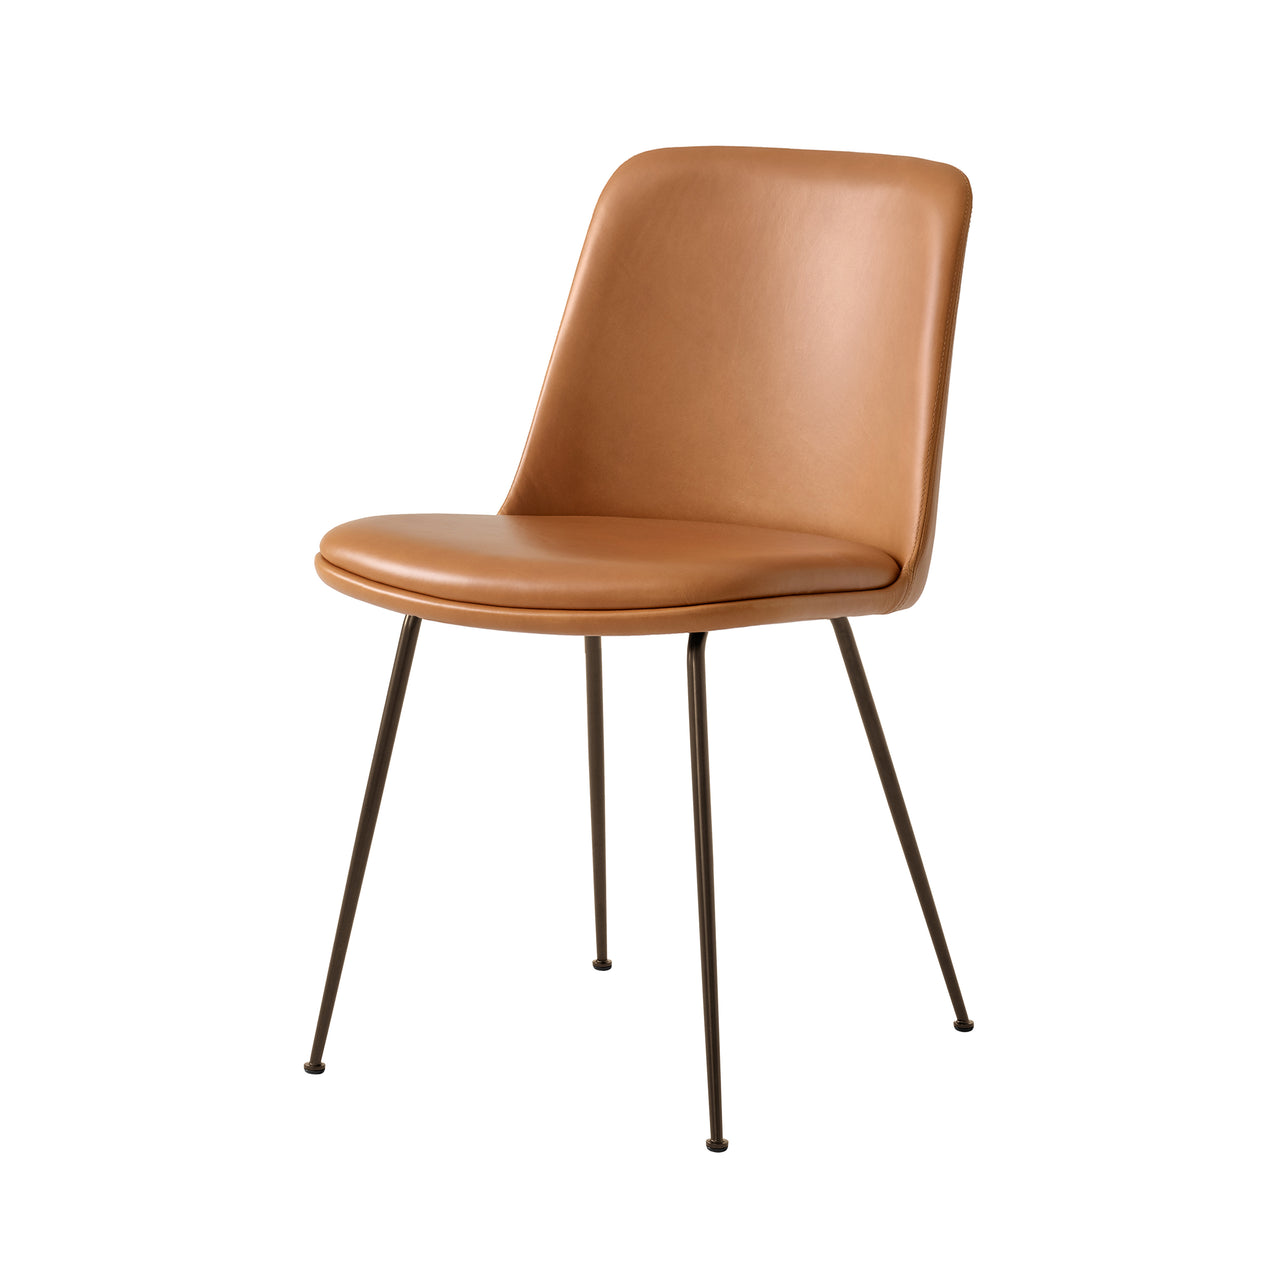 Rely Chair HW9: Bronzed